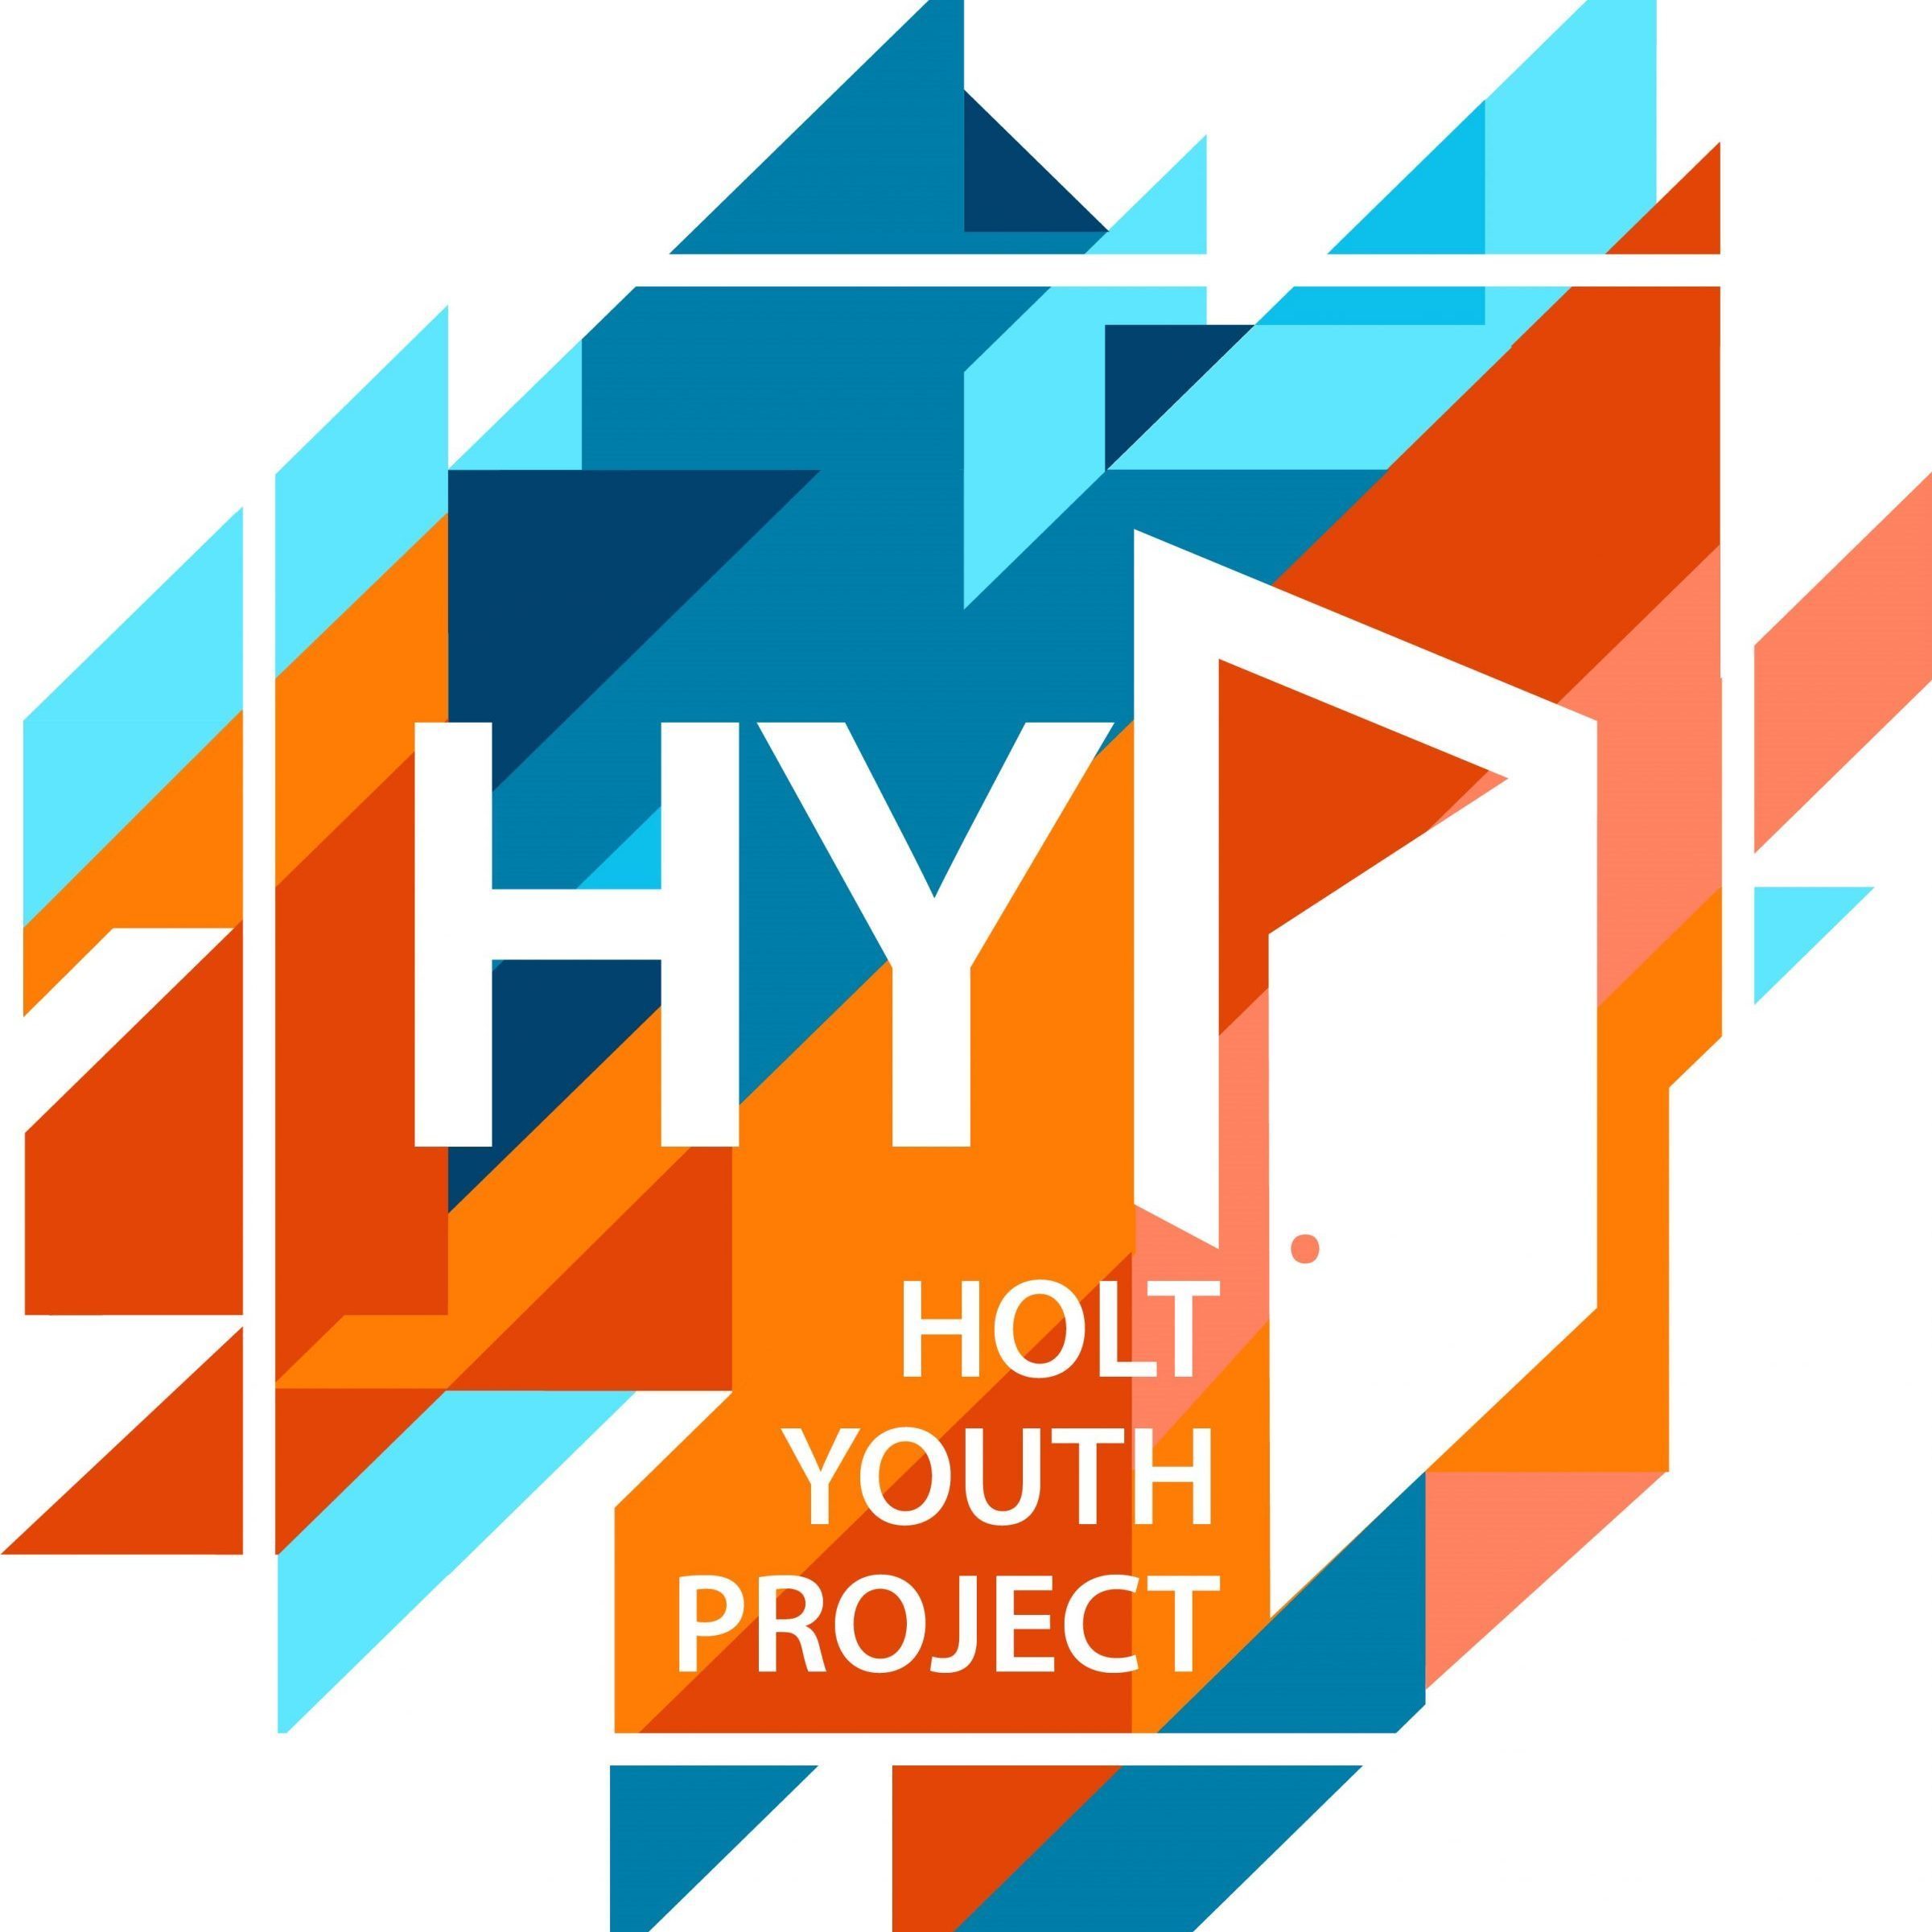 The Holt Youth Project